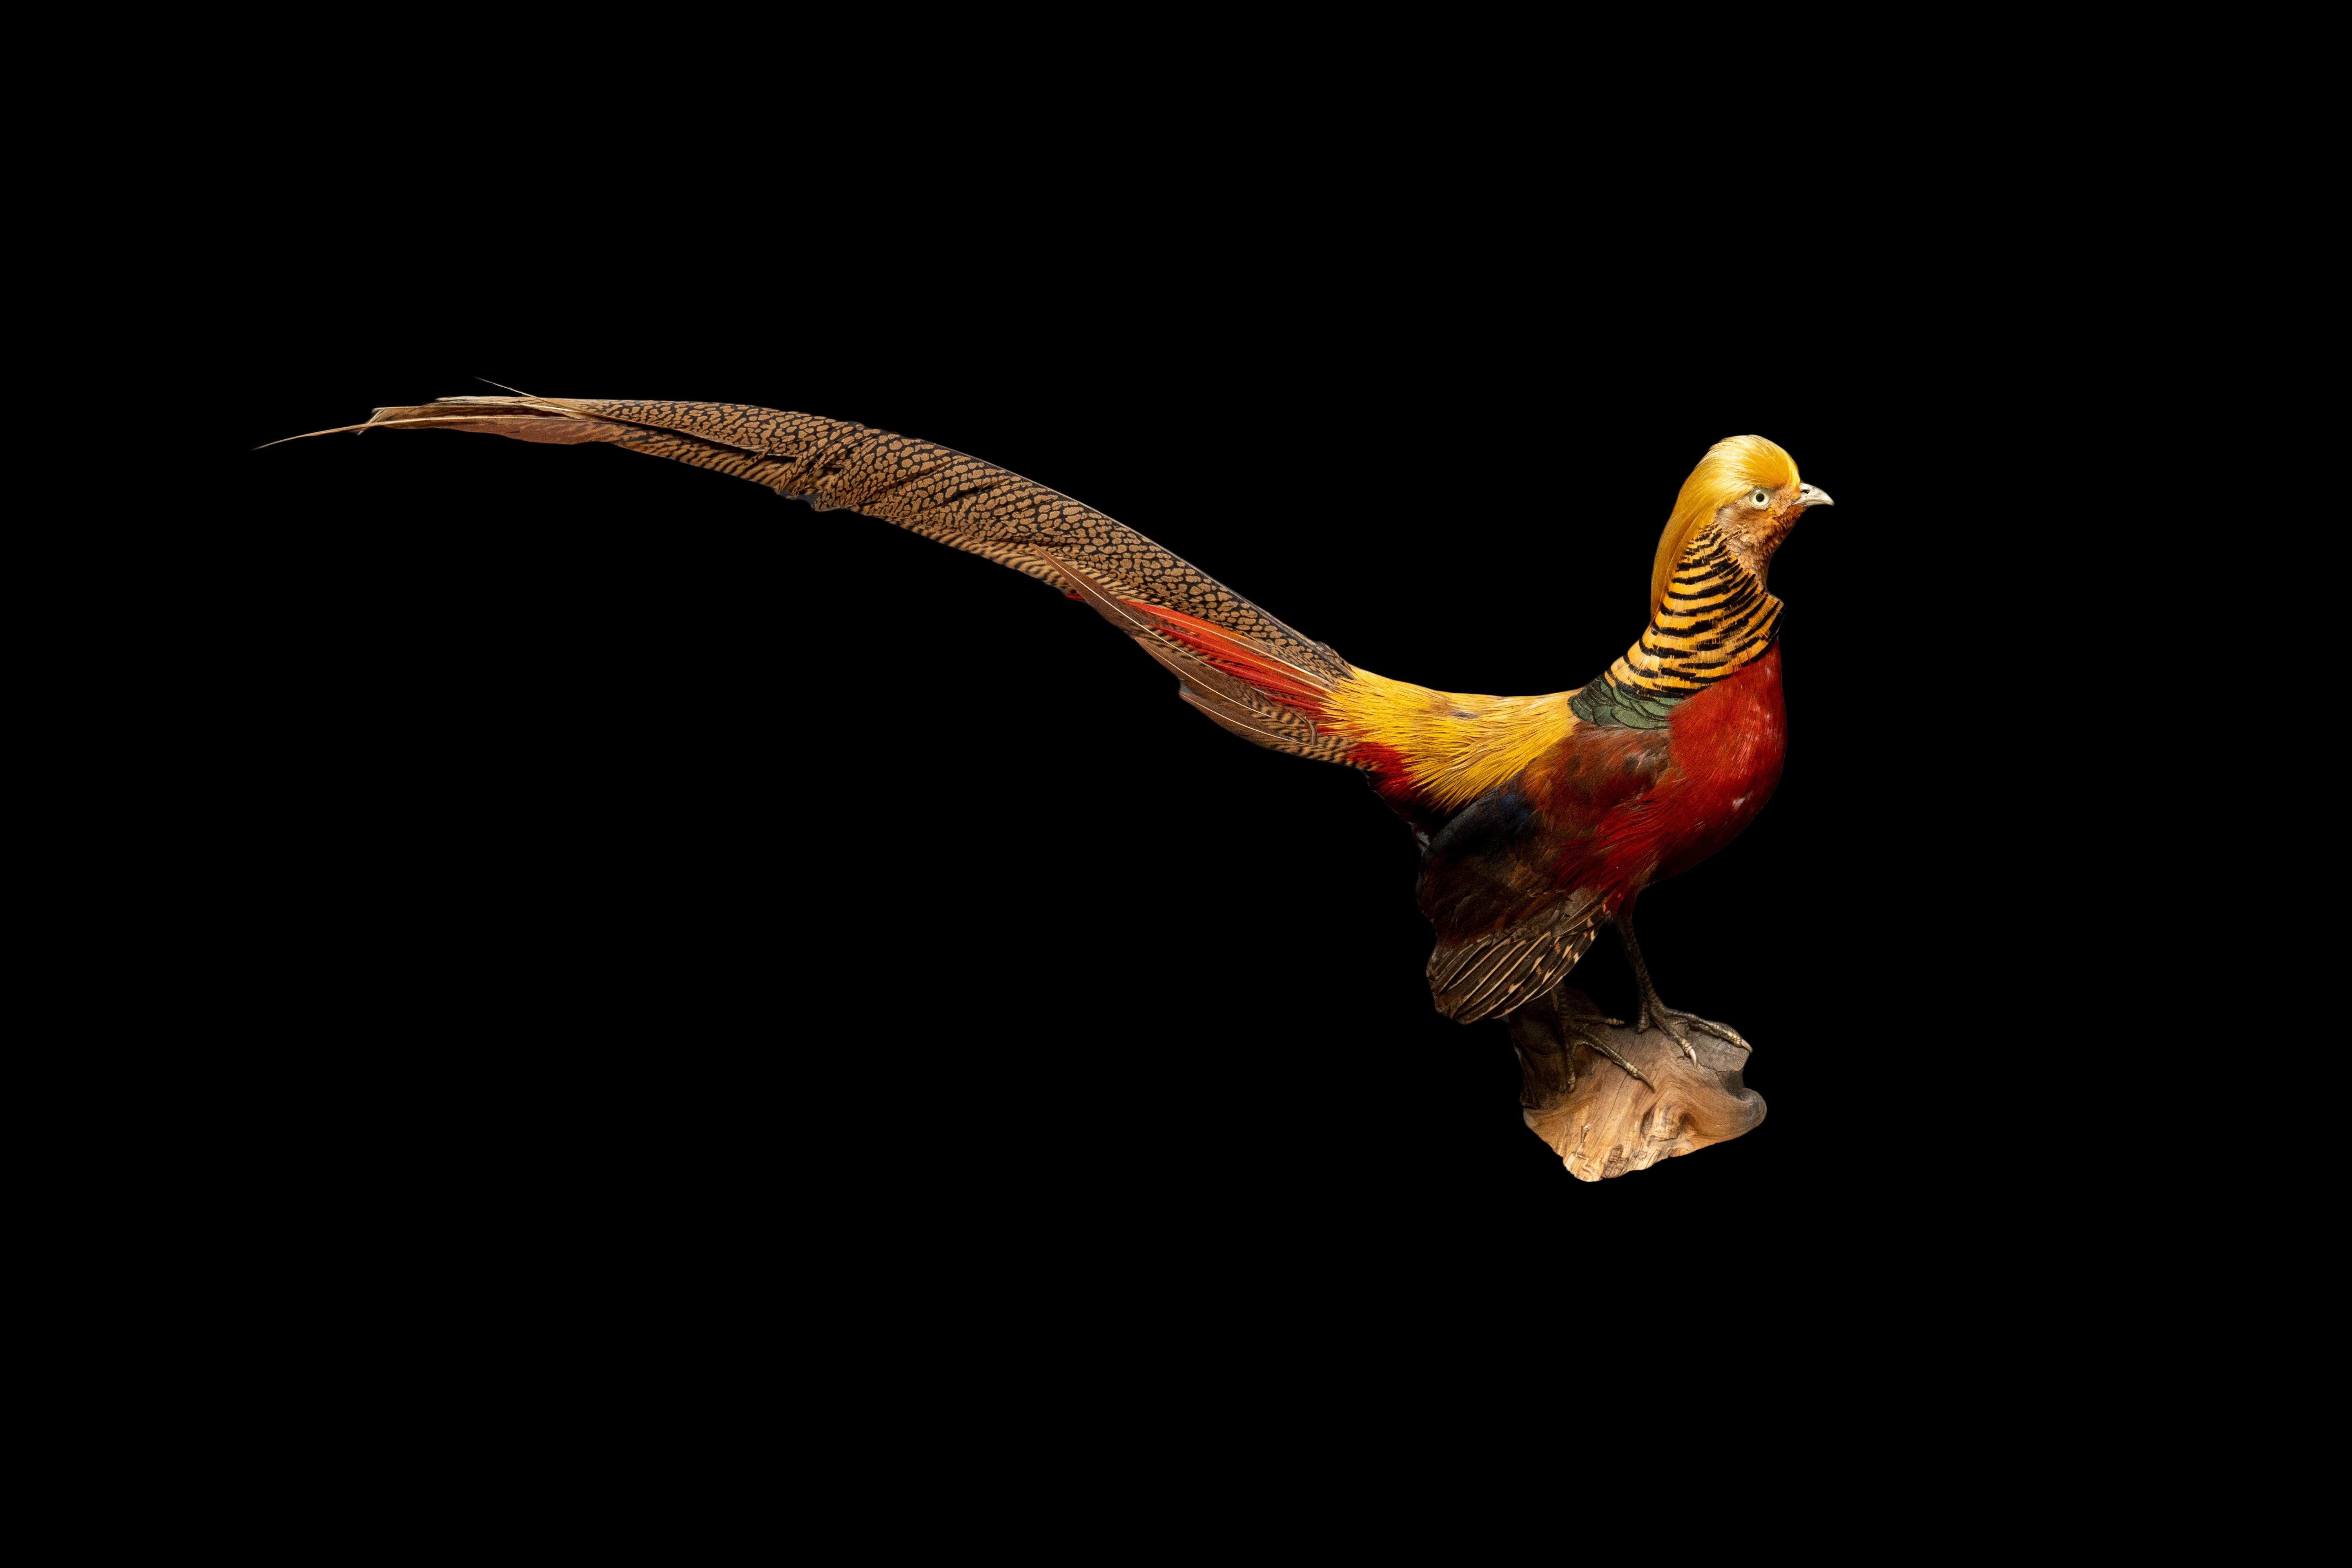 This beautiful taxidermy specimen features a Red Yellow Golden Pheasant, expertly mounted on a sturdy wooden base with the tail feathers proudly up. The pheasant's stunning plumage is captured in exquisite detail, with vibrant red and yellow